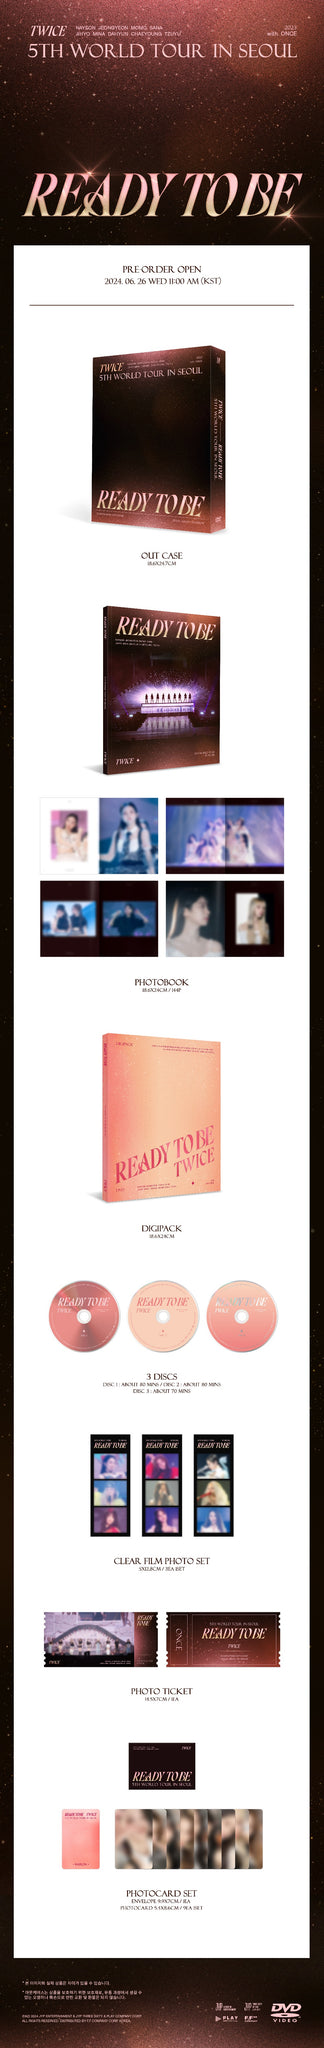 TWICE 5TH WORLD TOUR [READY TO BE] IN SEOUL DVD